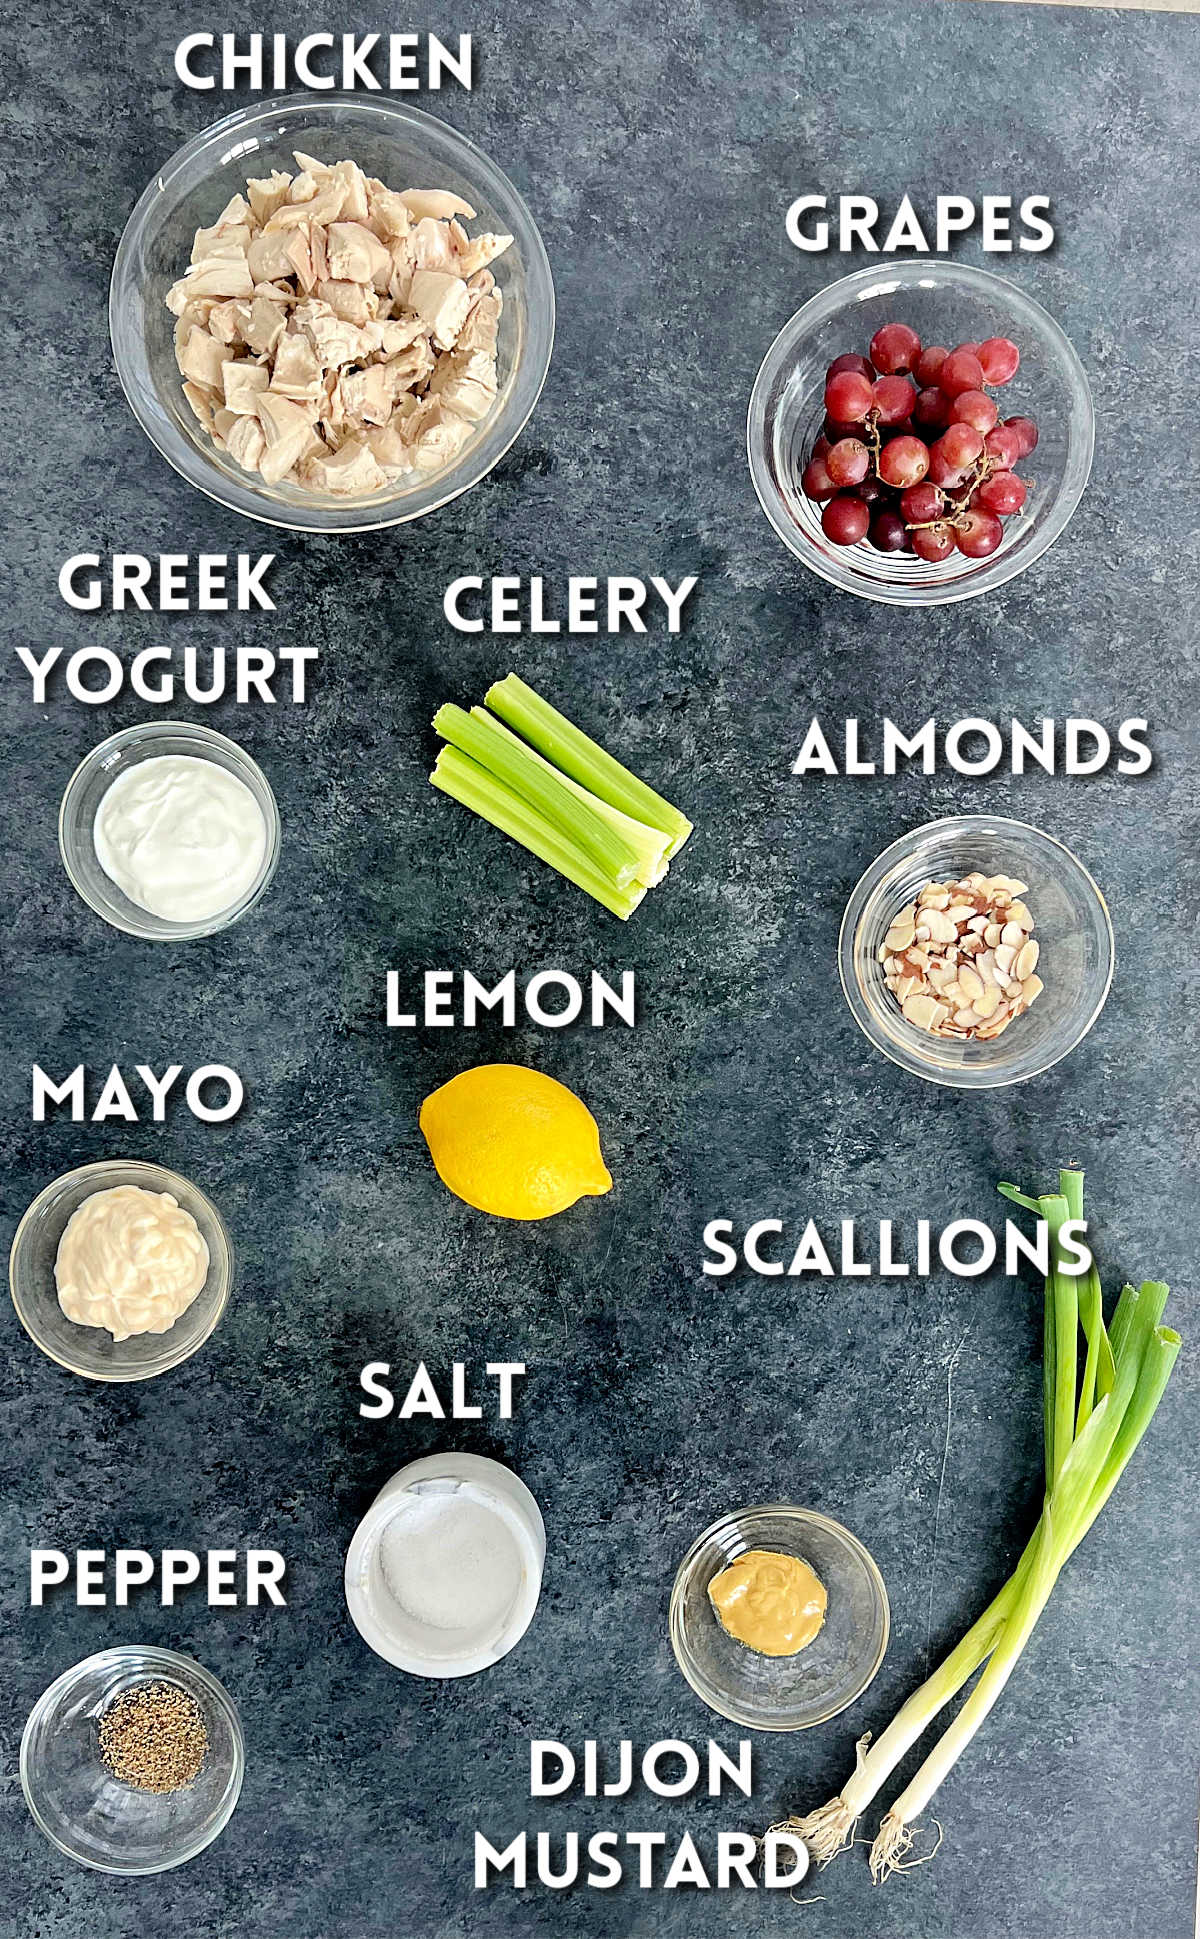 Ingredients for making chicken salad with grapes and almonds.